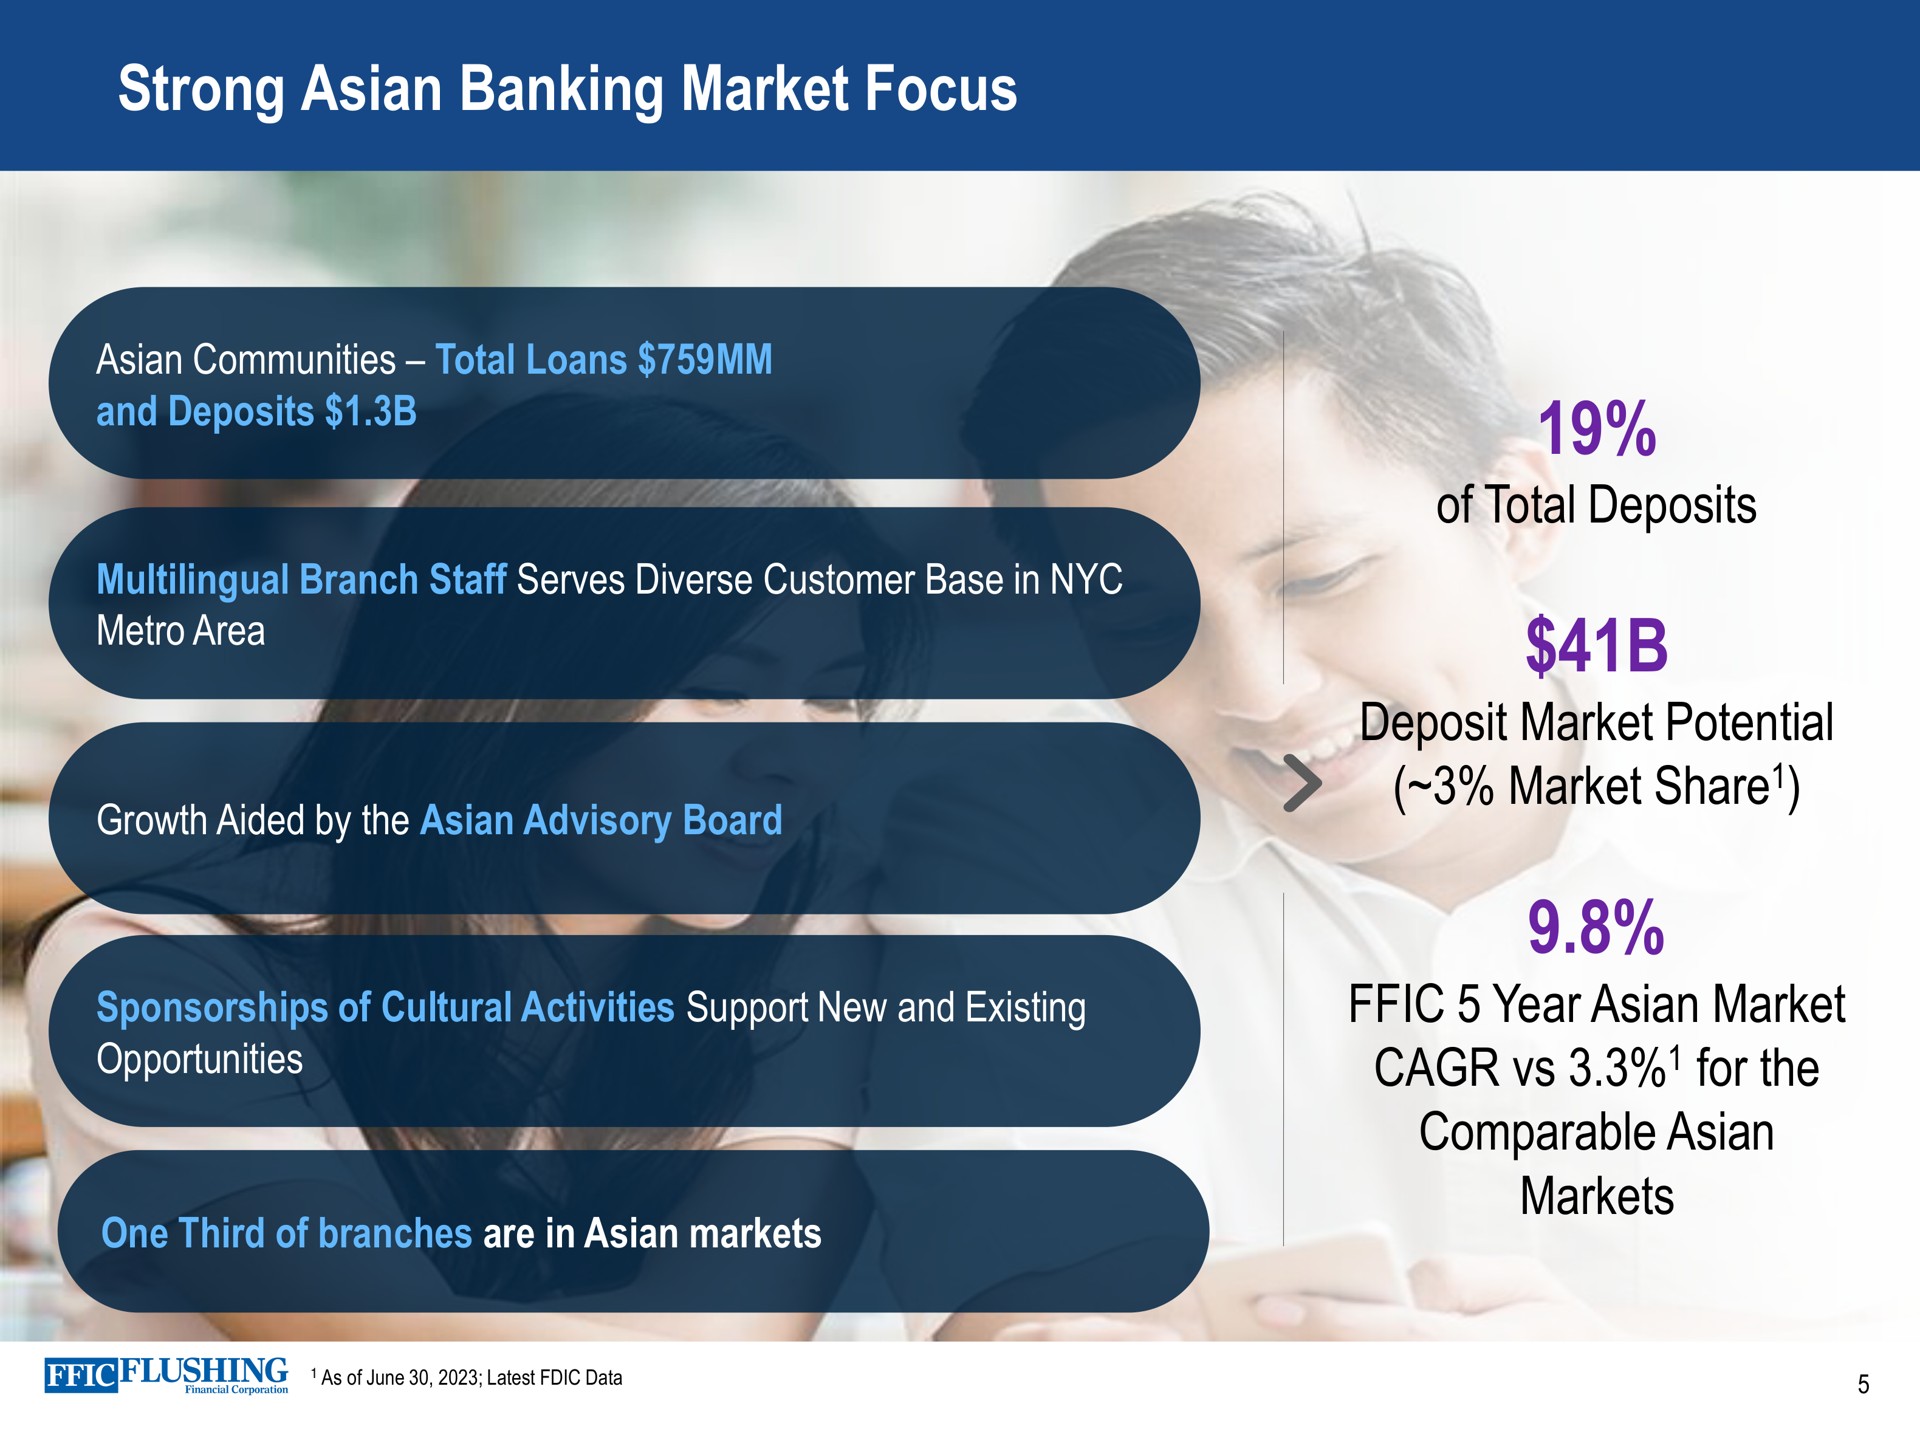 strong banking market focus of total deposits deposit market potential market share year market for the comparable markets communities loans and if if multilingual branch staff serves diverse customer base in area growth aided by advisory board one lie sponsorships cultural activities support new and existing opportunities share one third branches are in june latest data | Flushing Financial